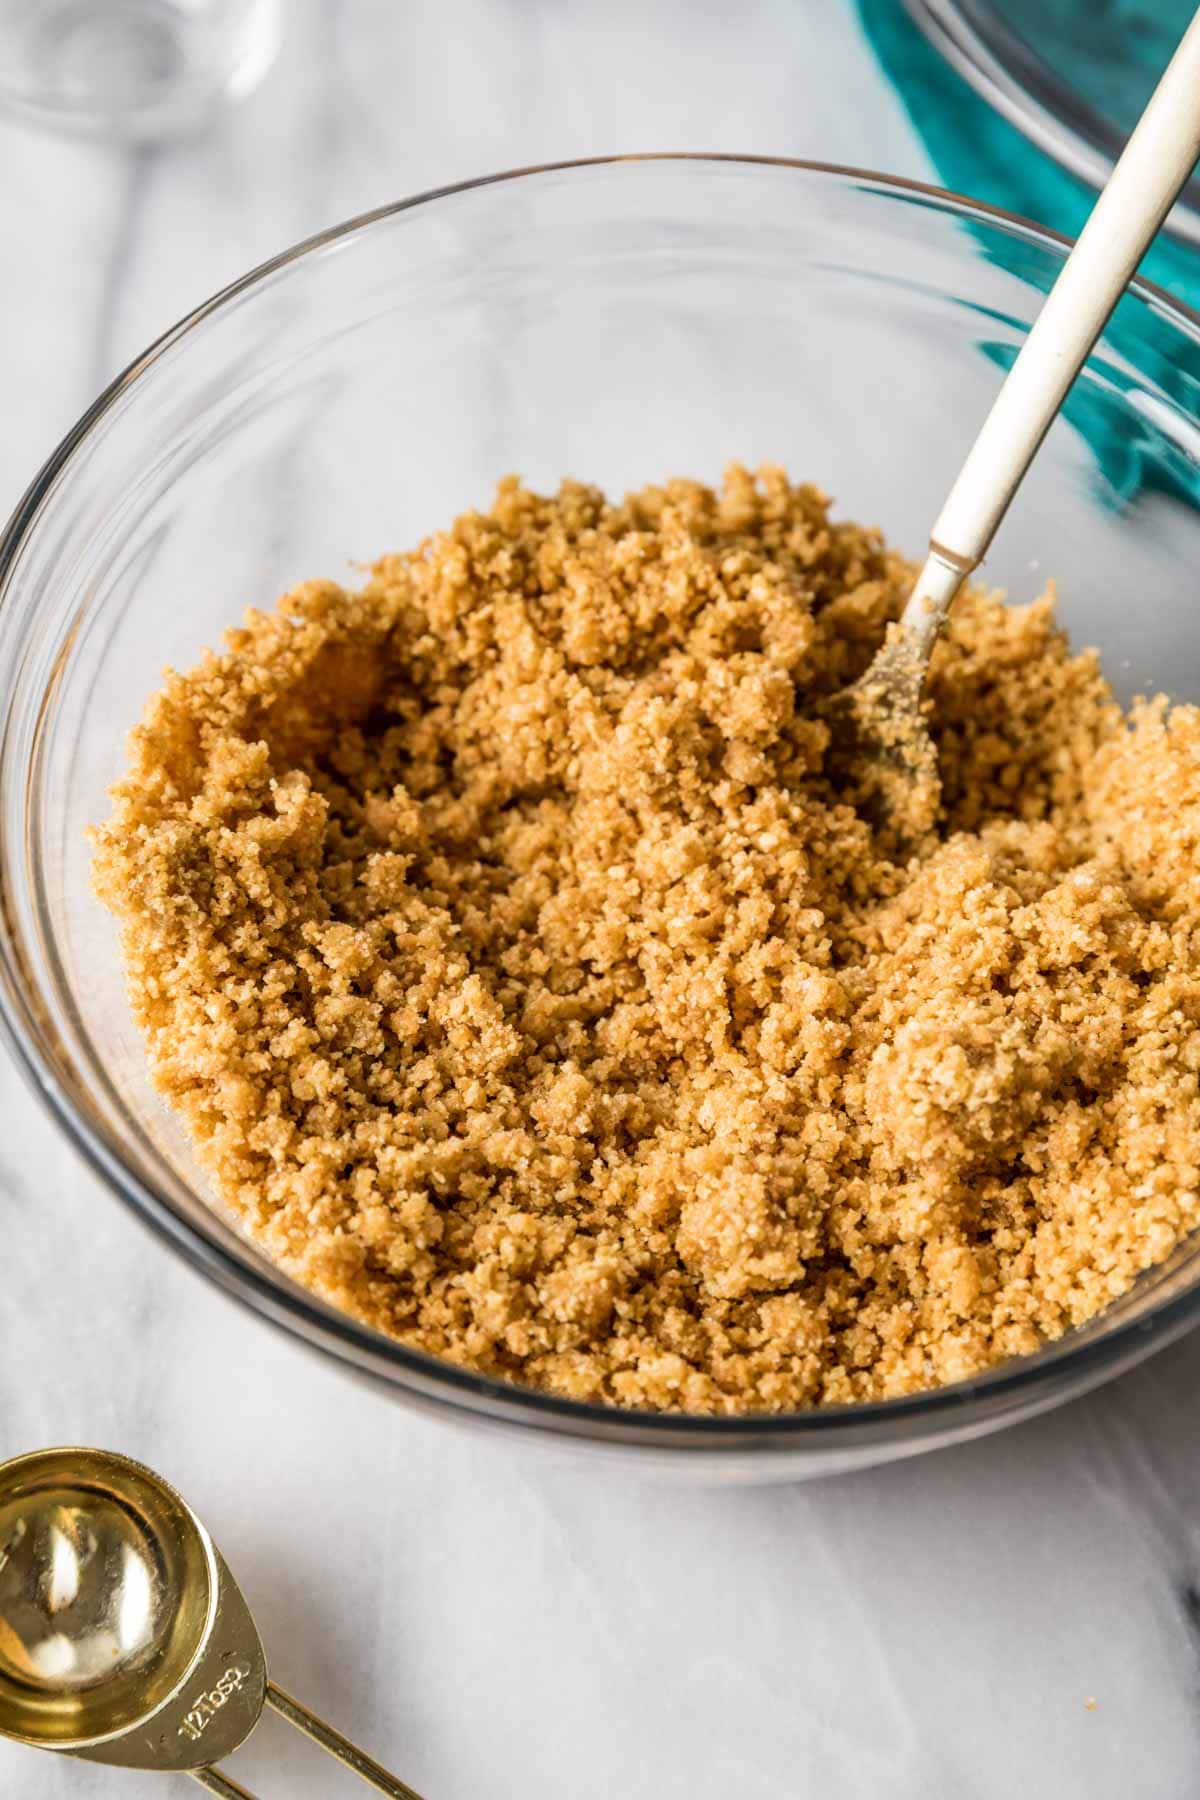 Fork tossing graham cracker crumbs together with butter and sugar.